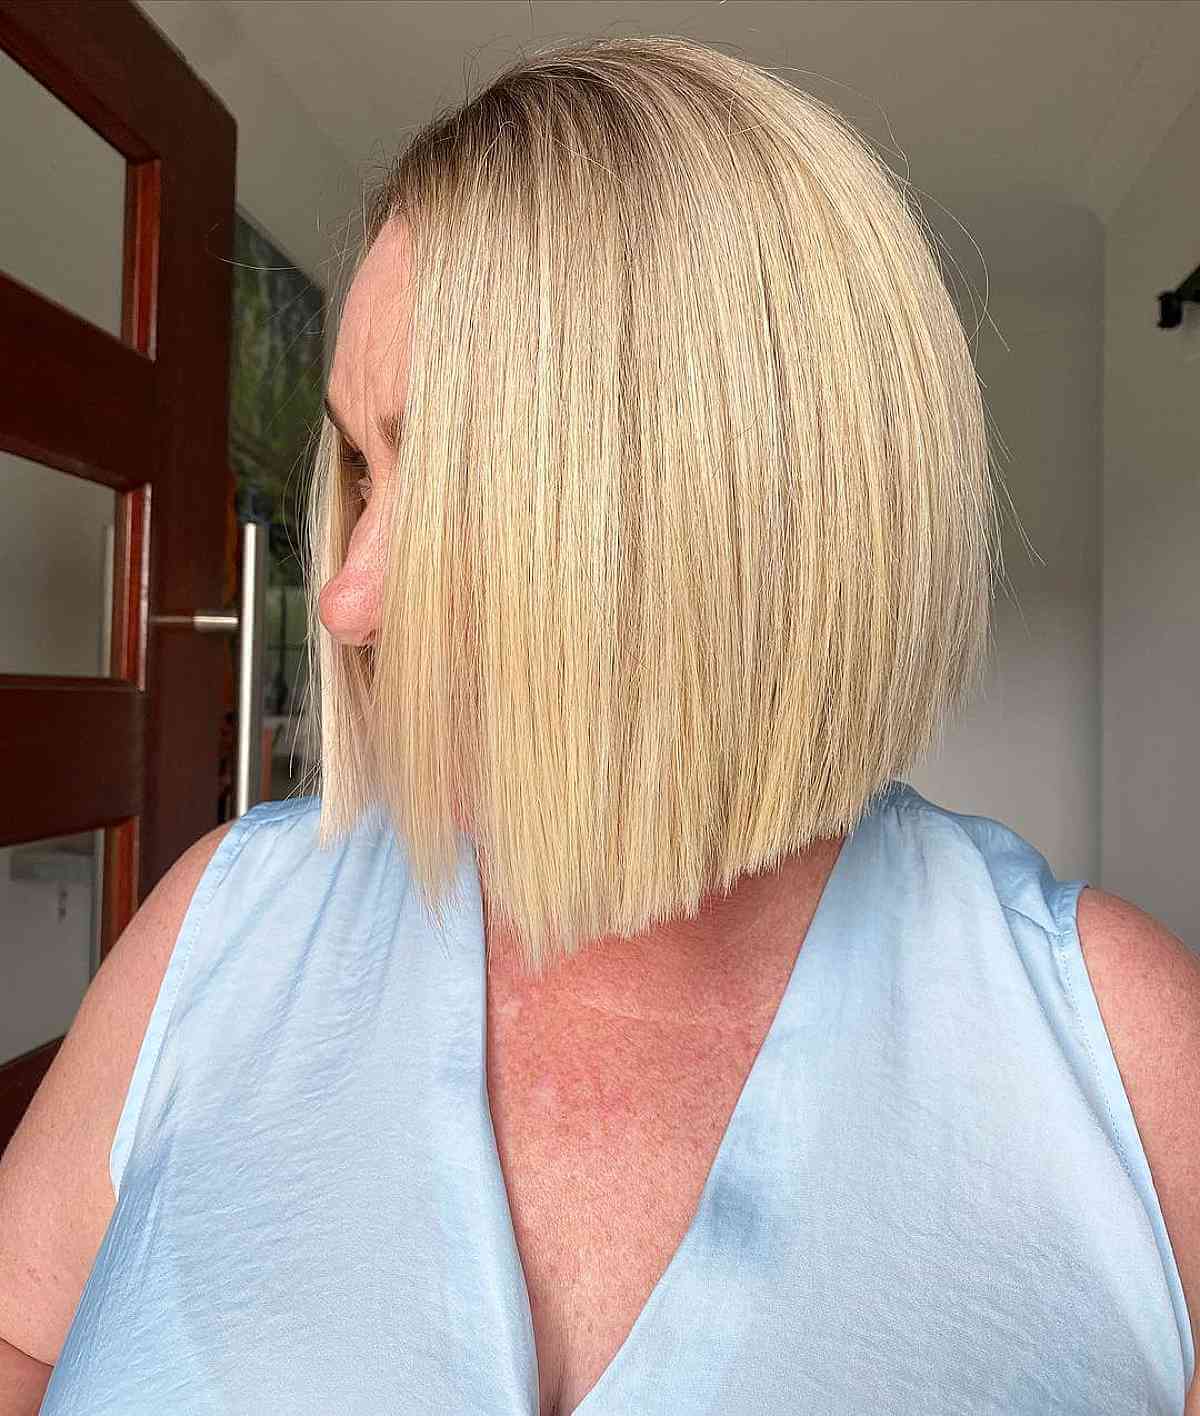 Trendy blunt cut blonde bob style for ladies in their 60s